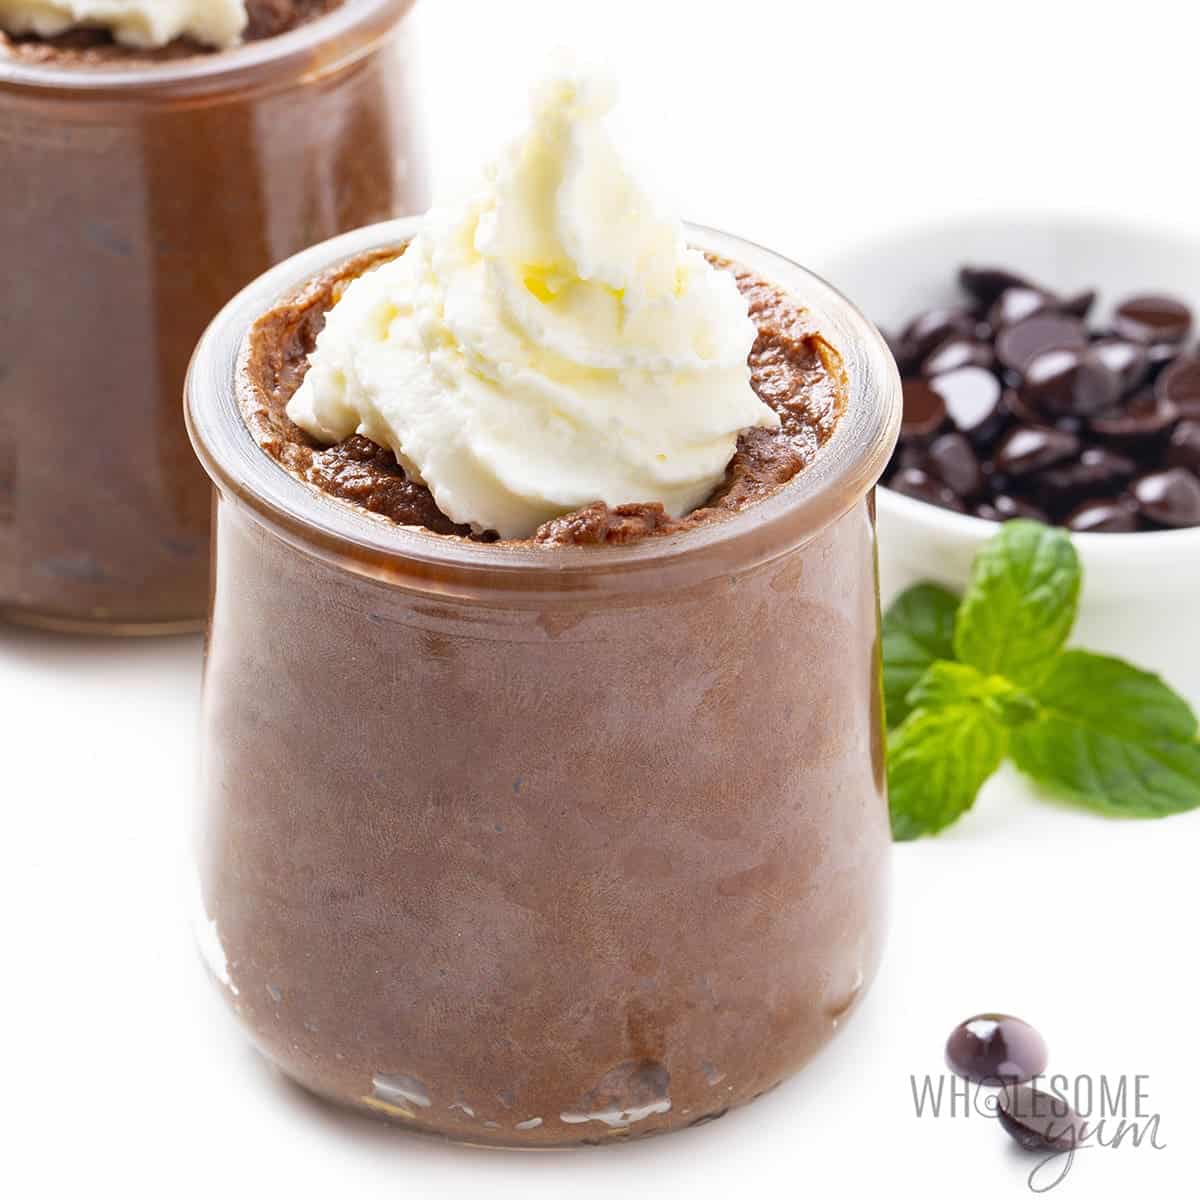 Keto chocolate mousse recipe in small jars with whipped cream.